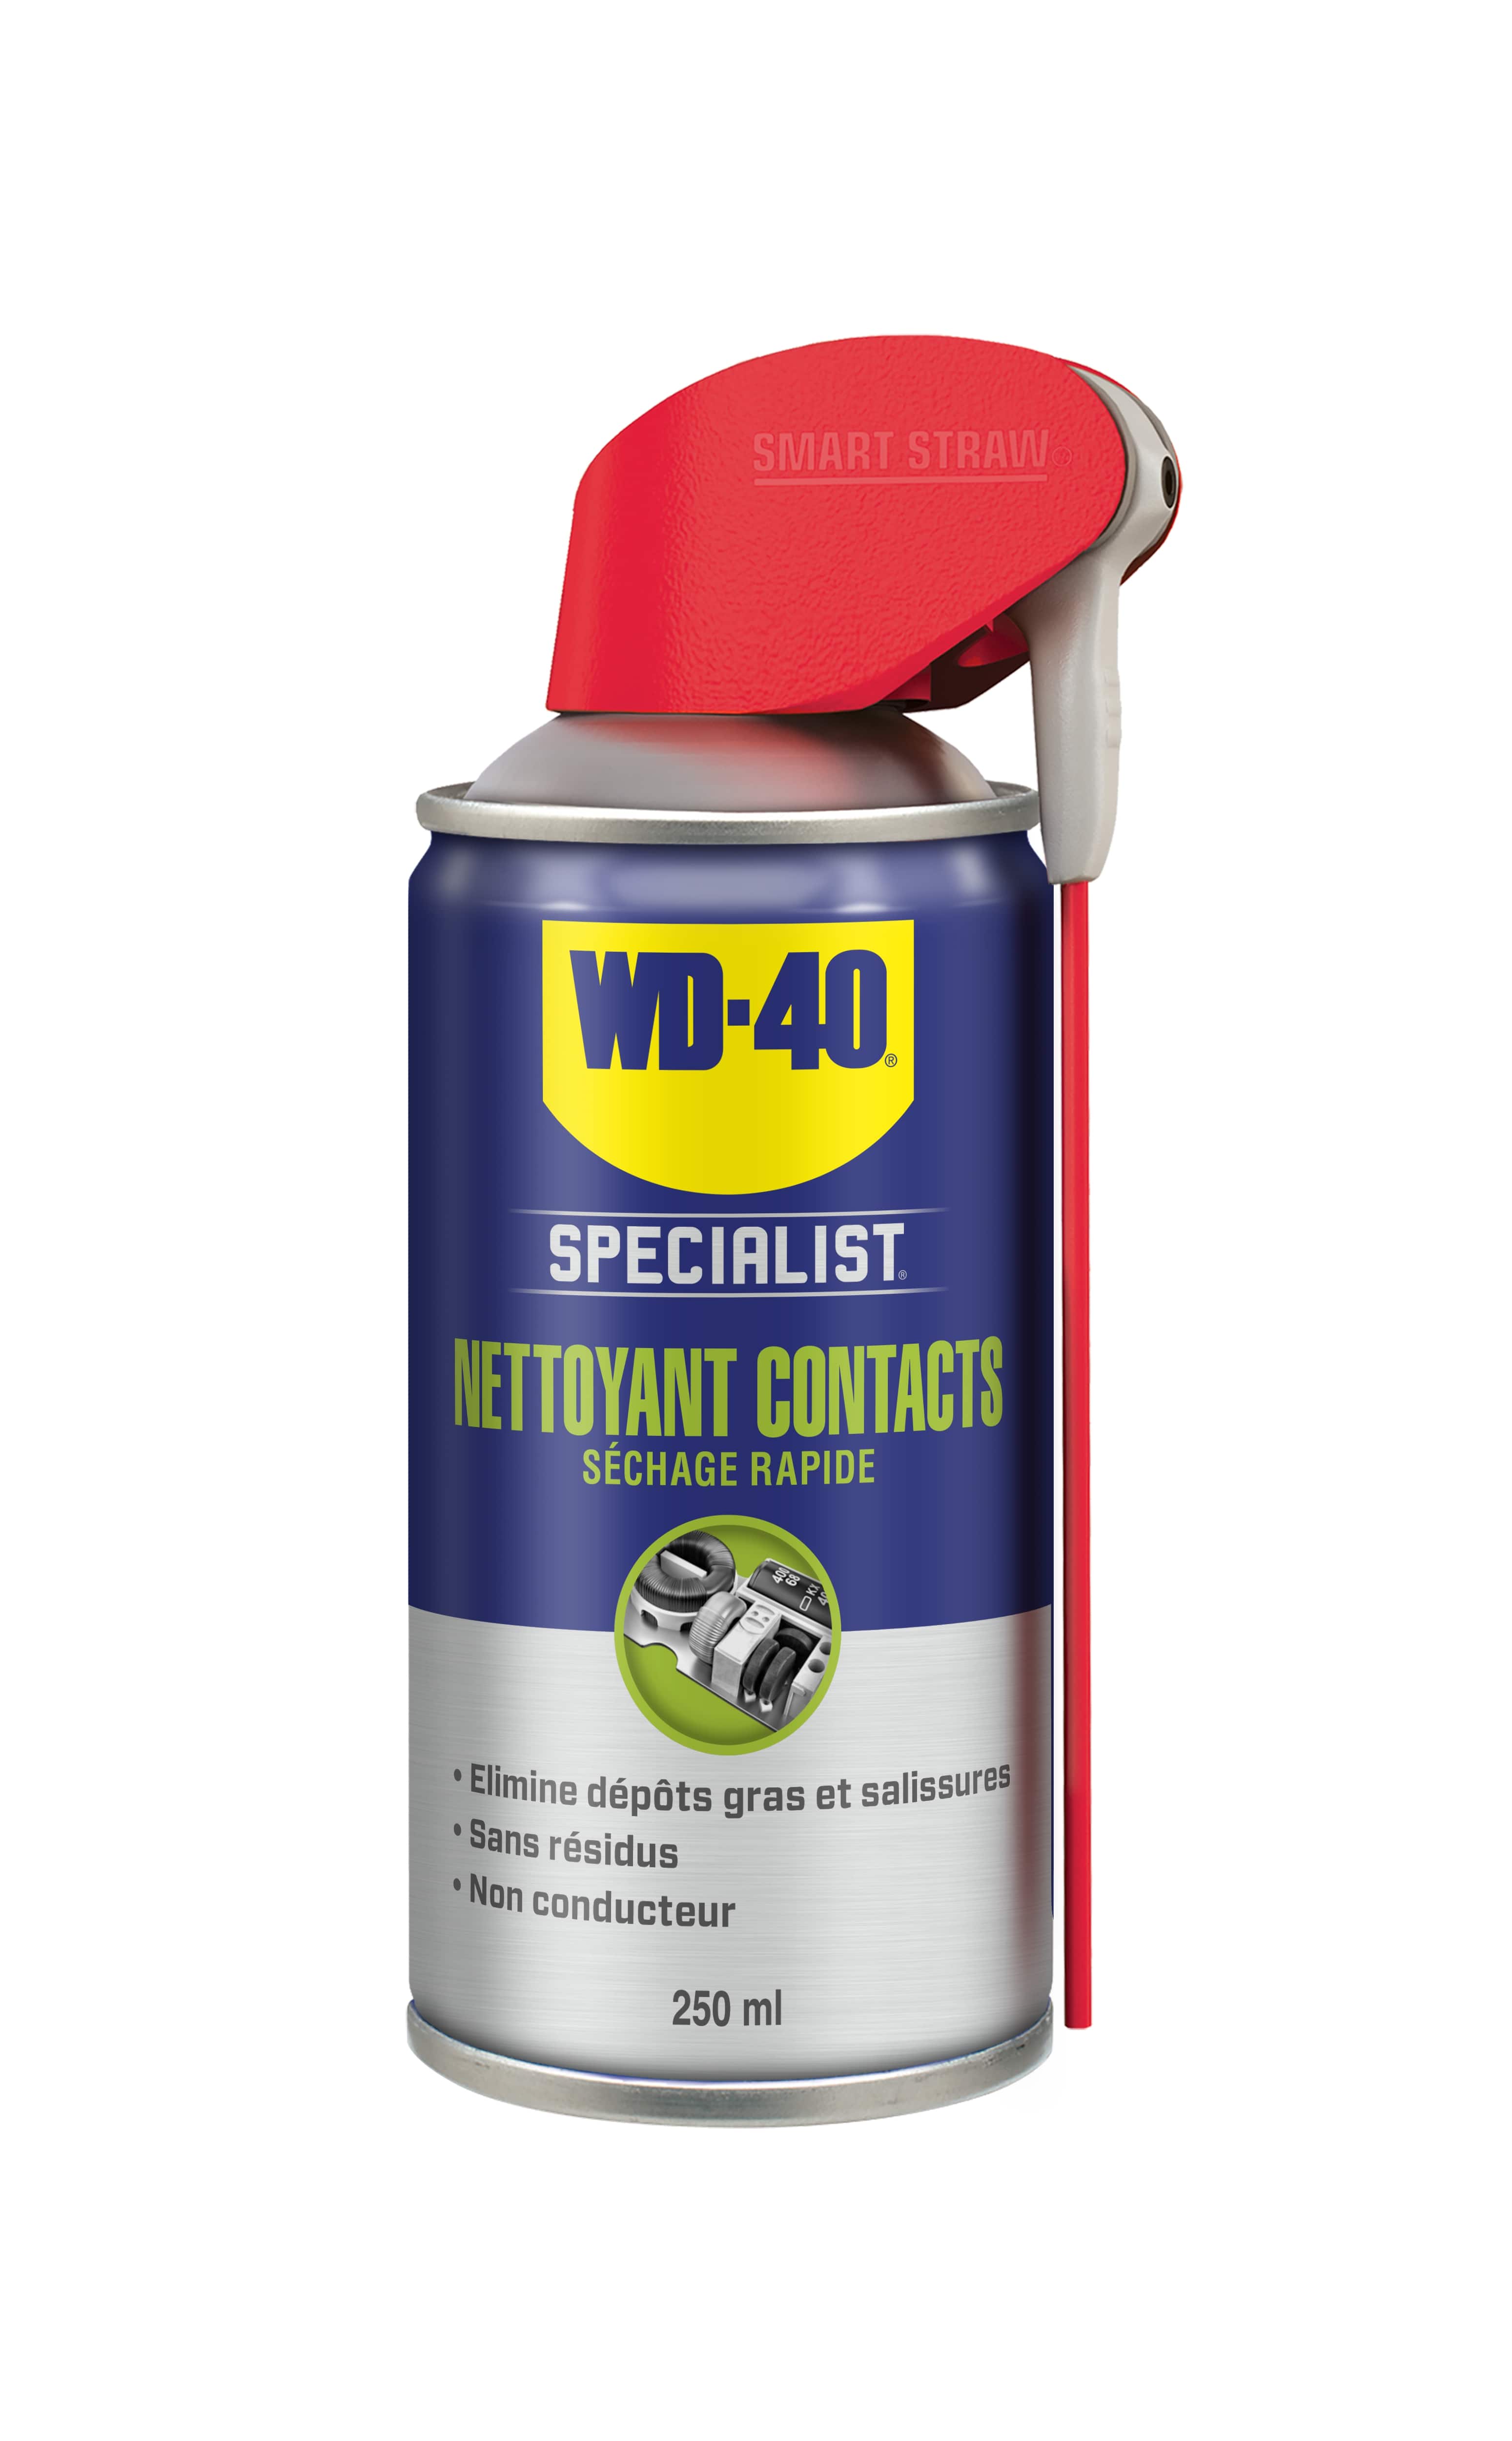 Spray Nettoyant Contacts - Specialist 250ml - WD 40